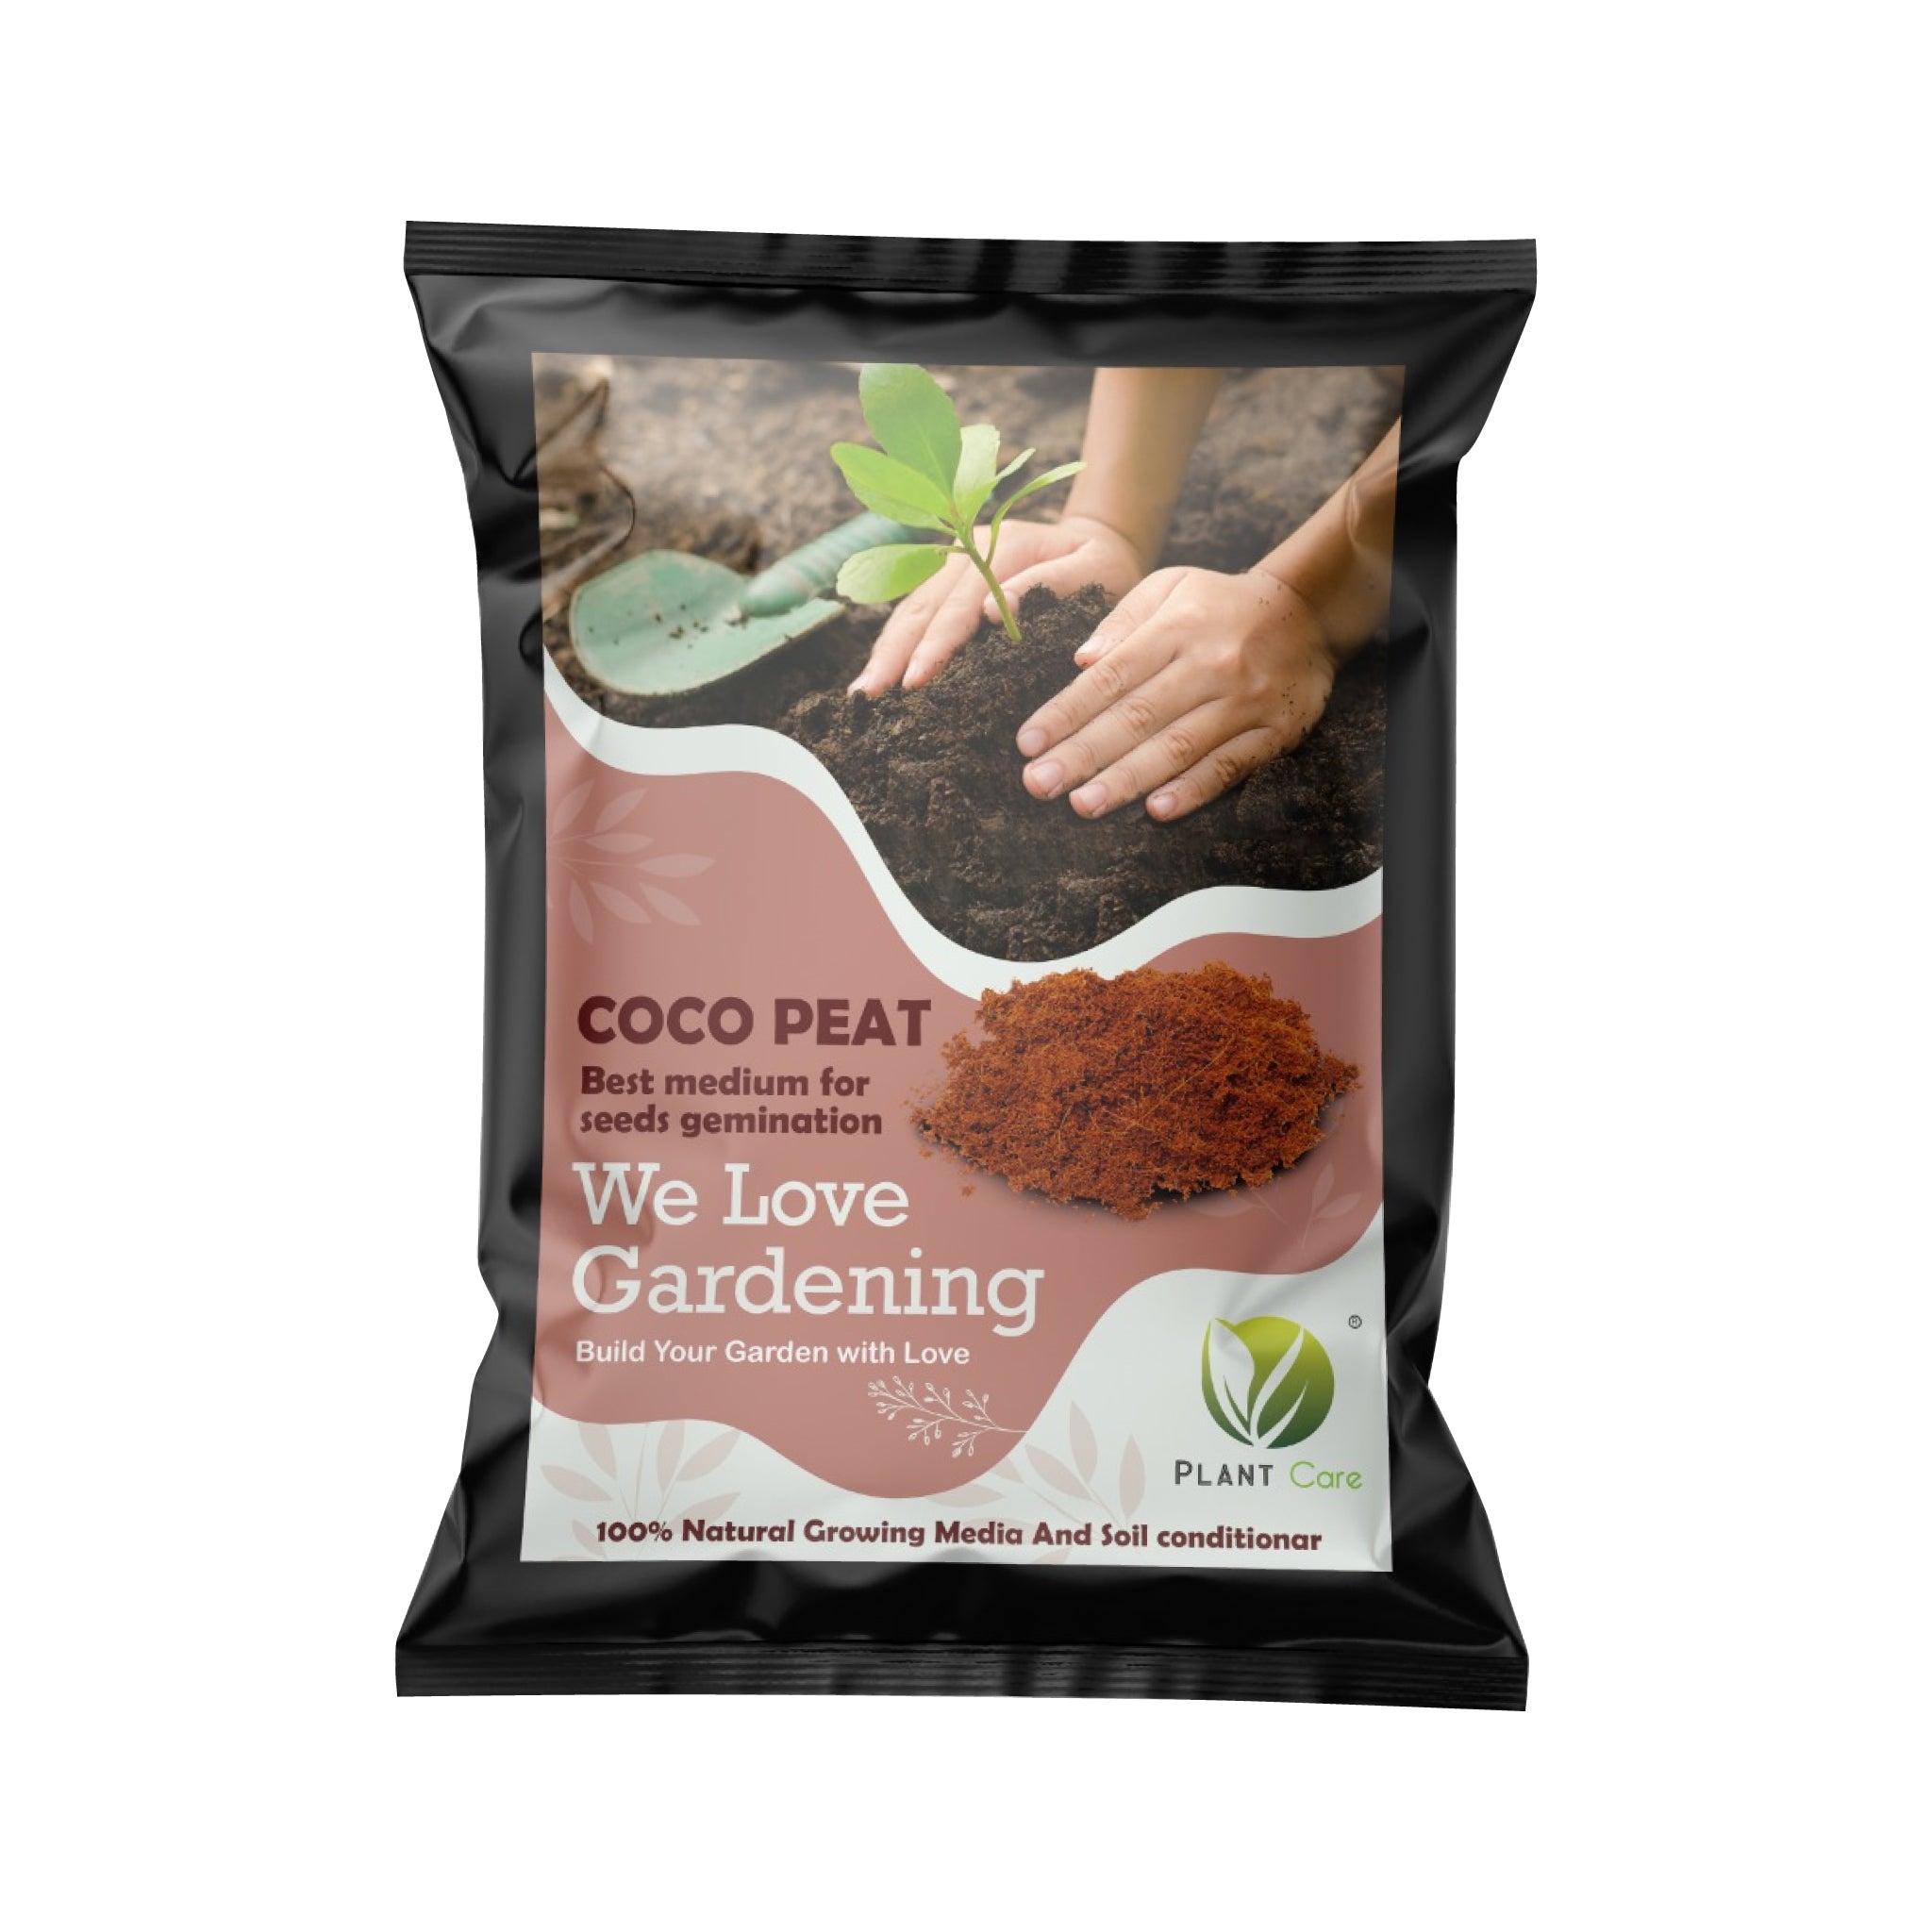 All-natural and eco-friendly cocopeat for your plants